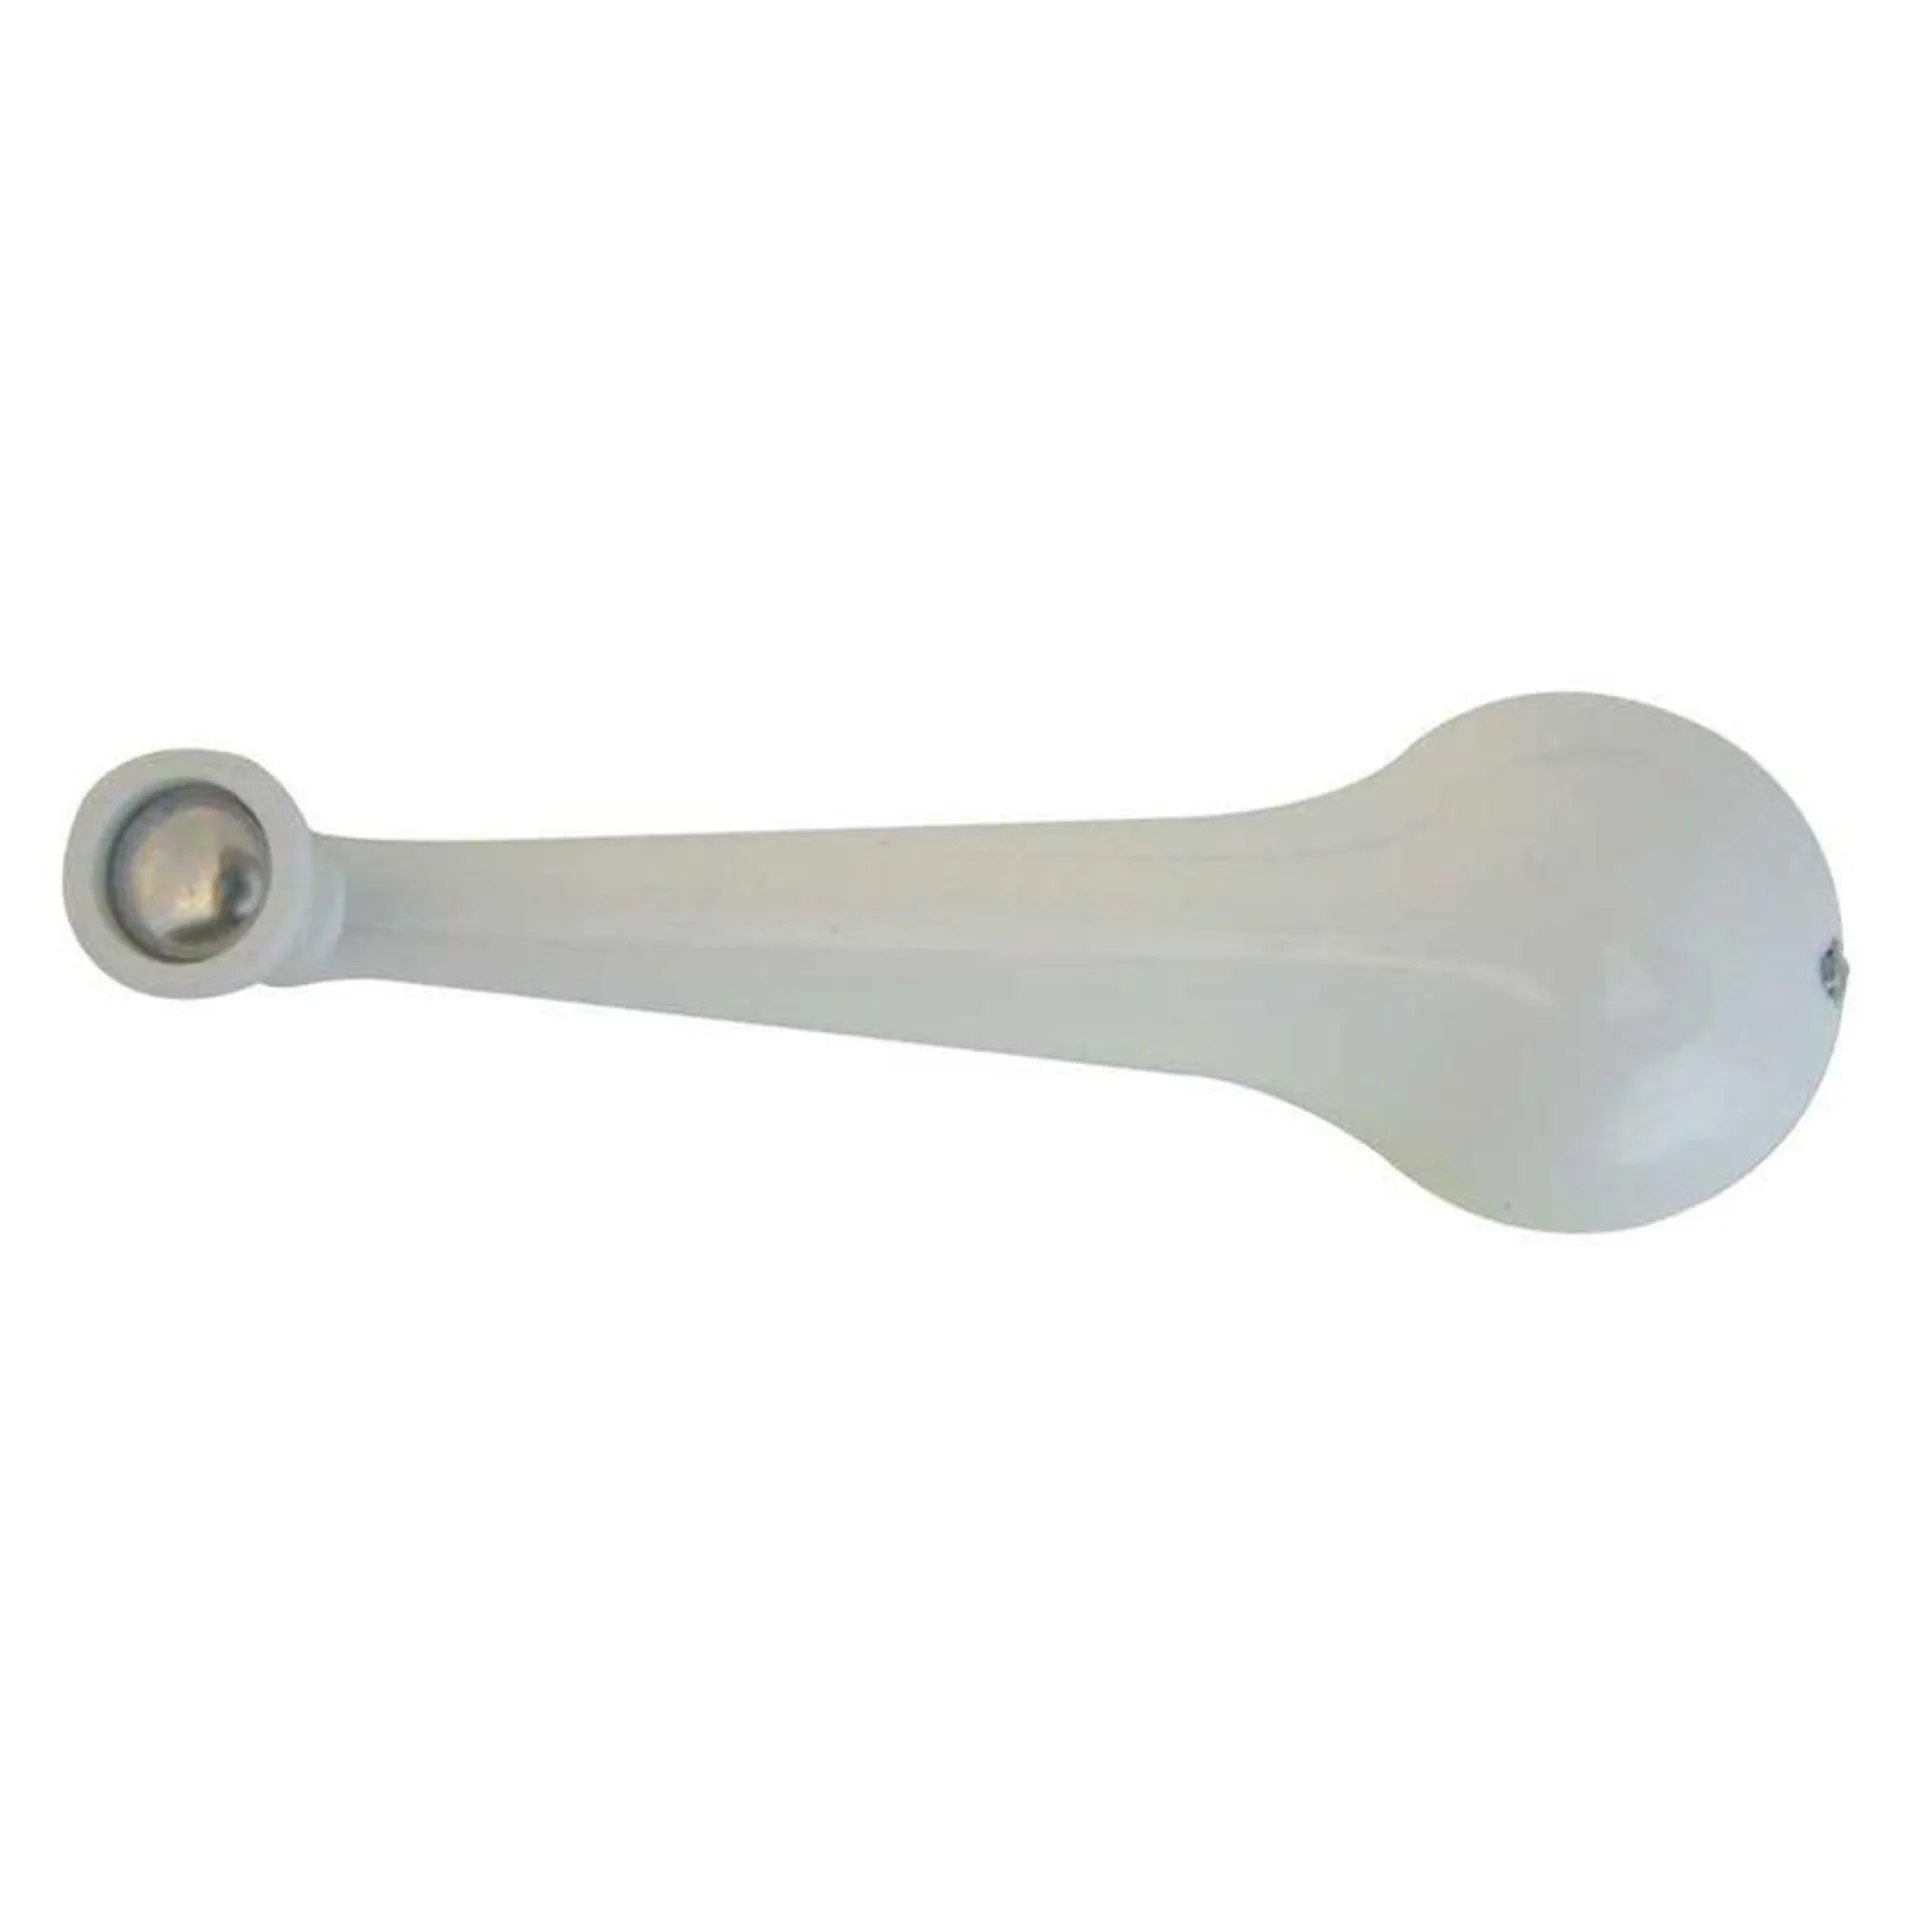 Replacement Crank Handle - White